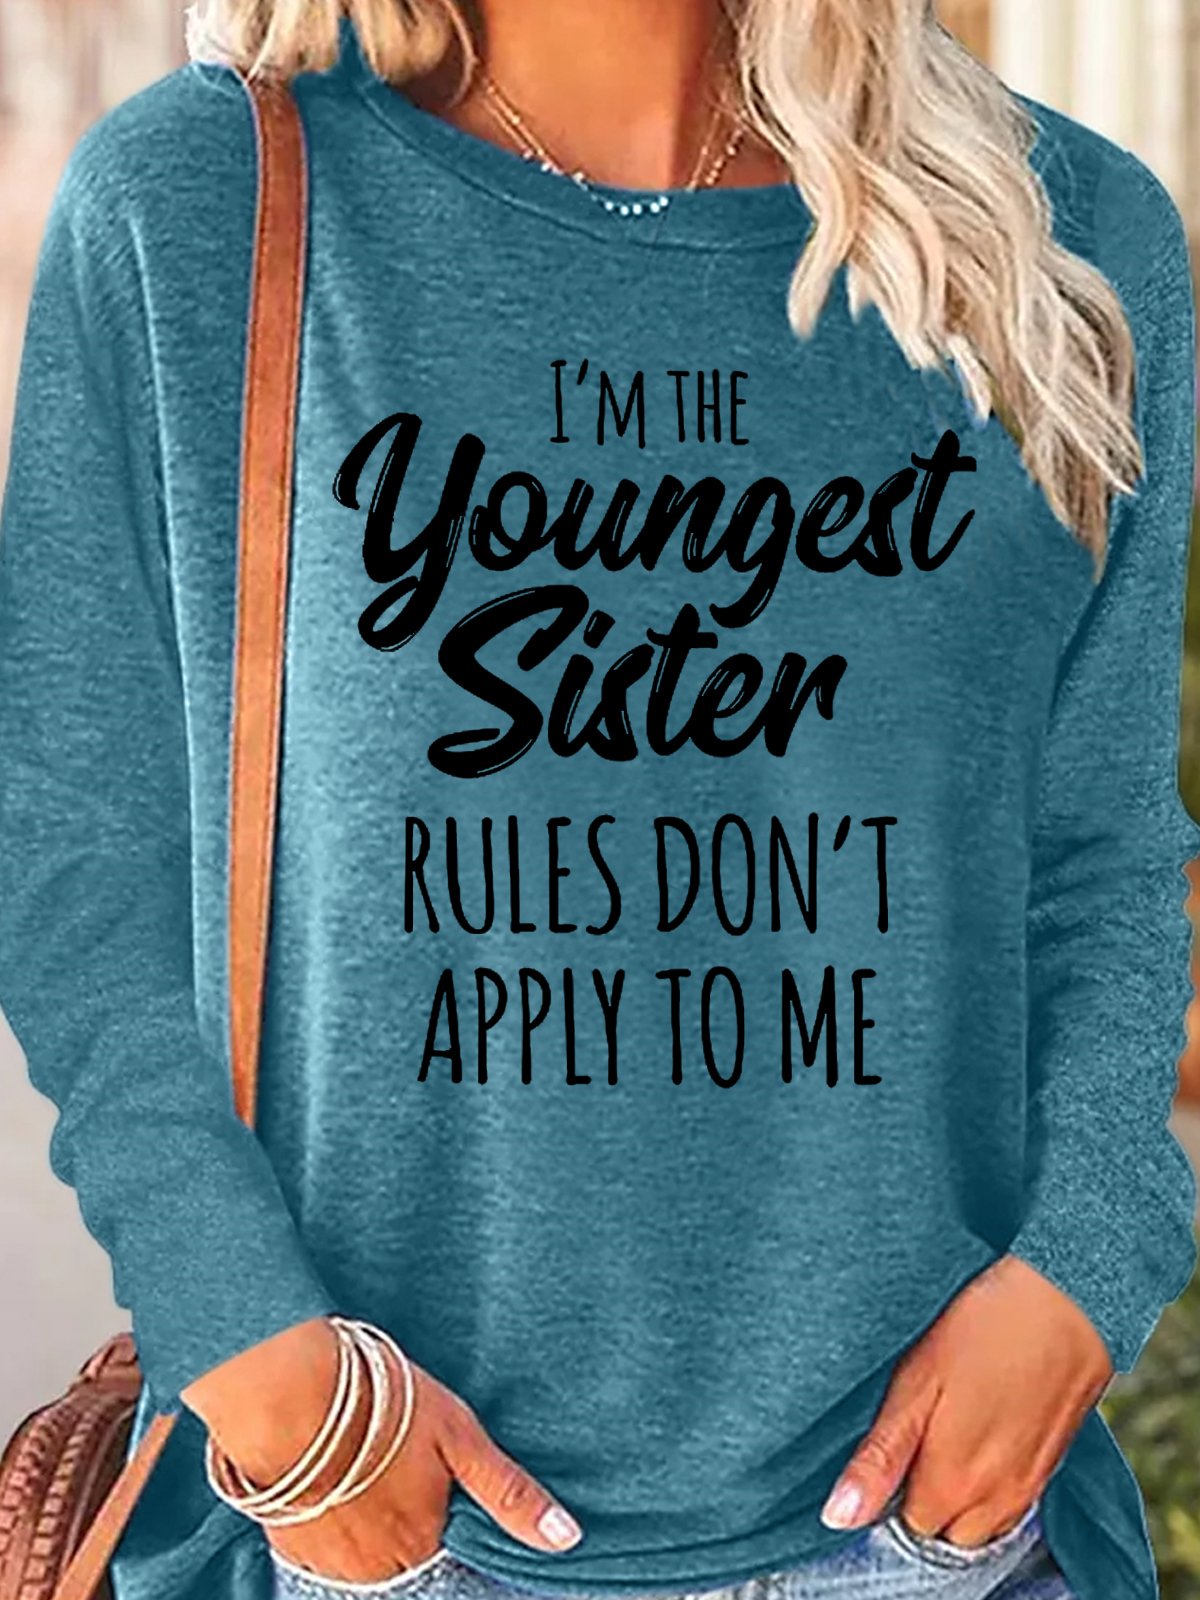 Women's Funny Sister Gift Youngest Sister Casual Long Sleeve Top